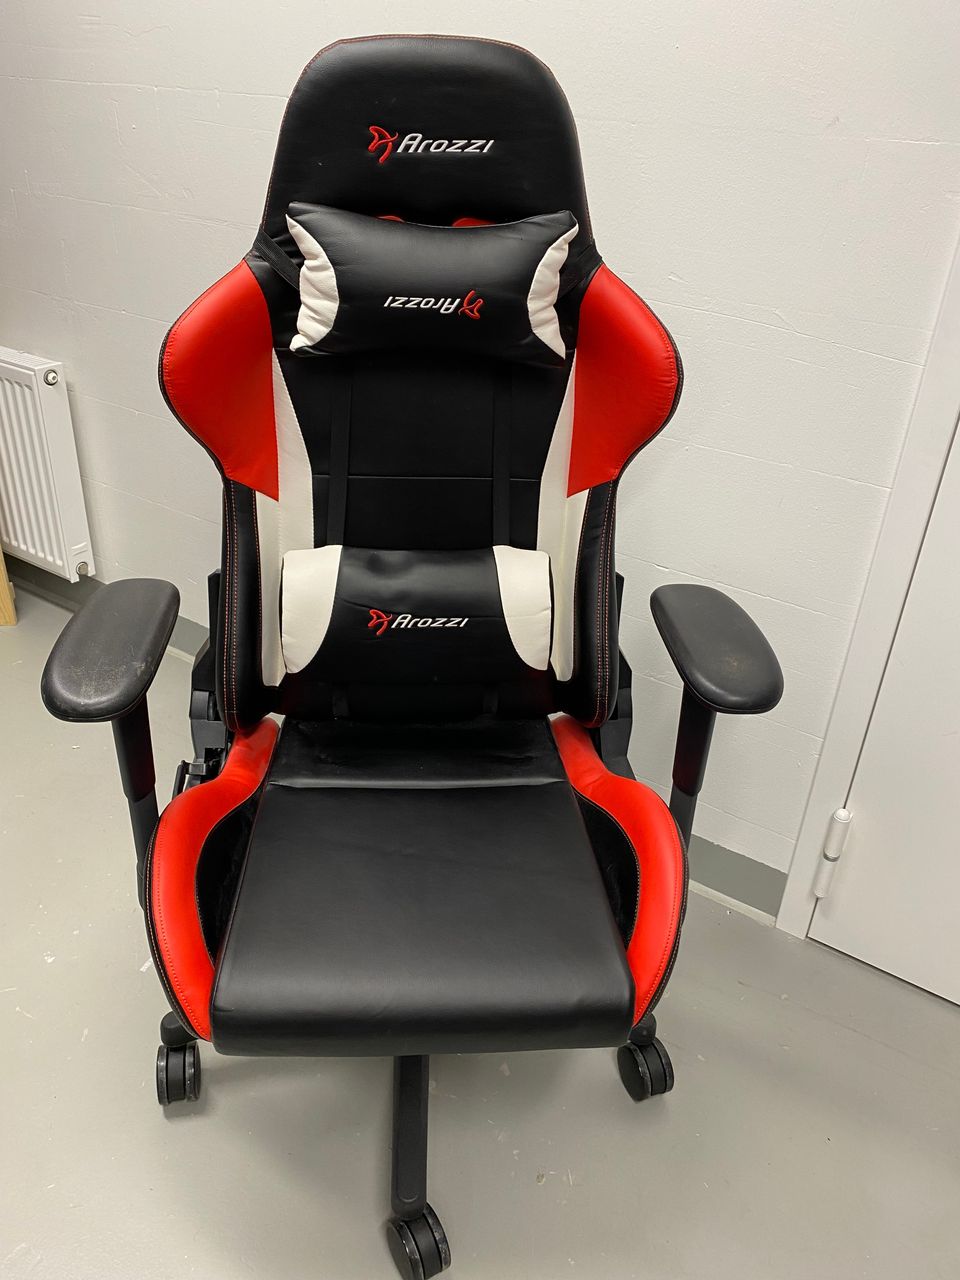 Gaming or office chair - brand (Arozzi)